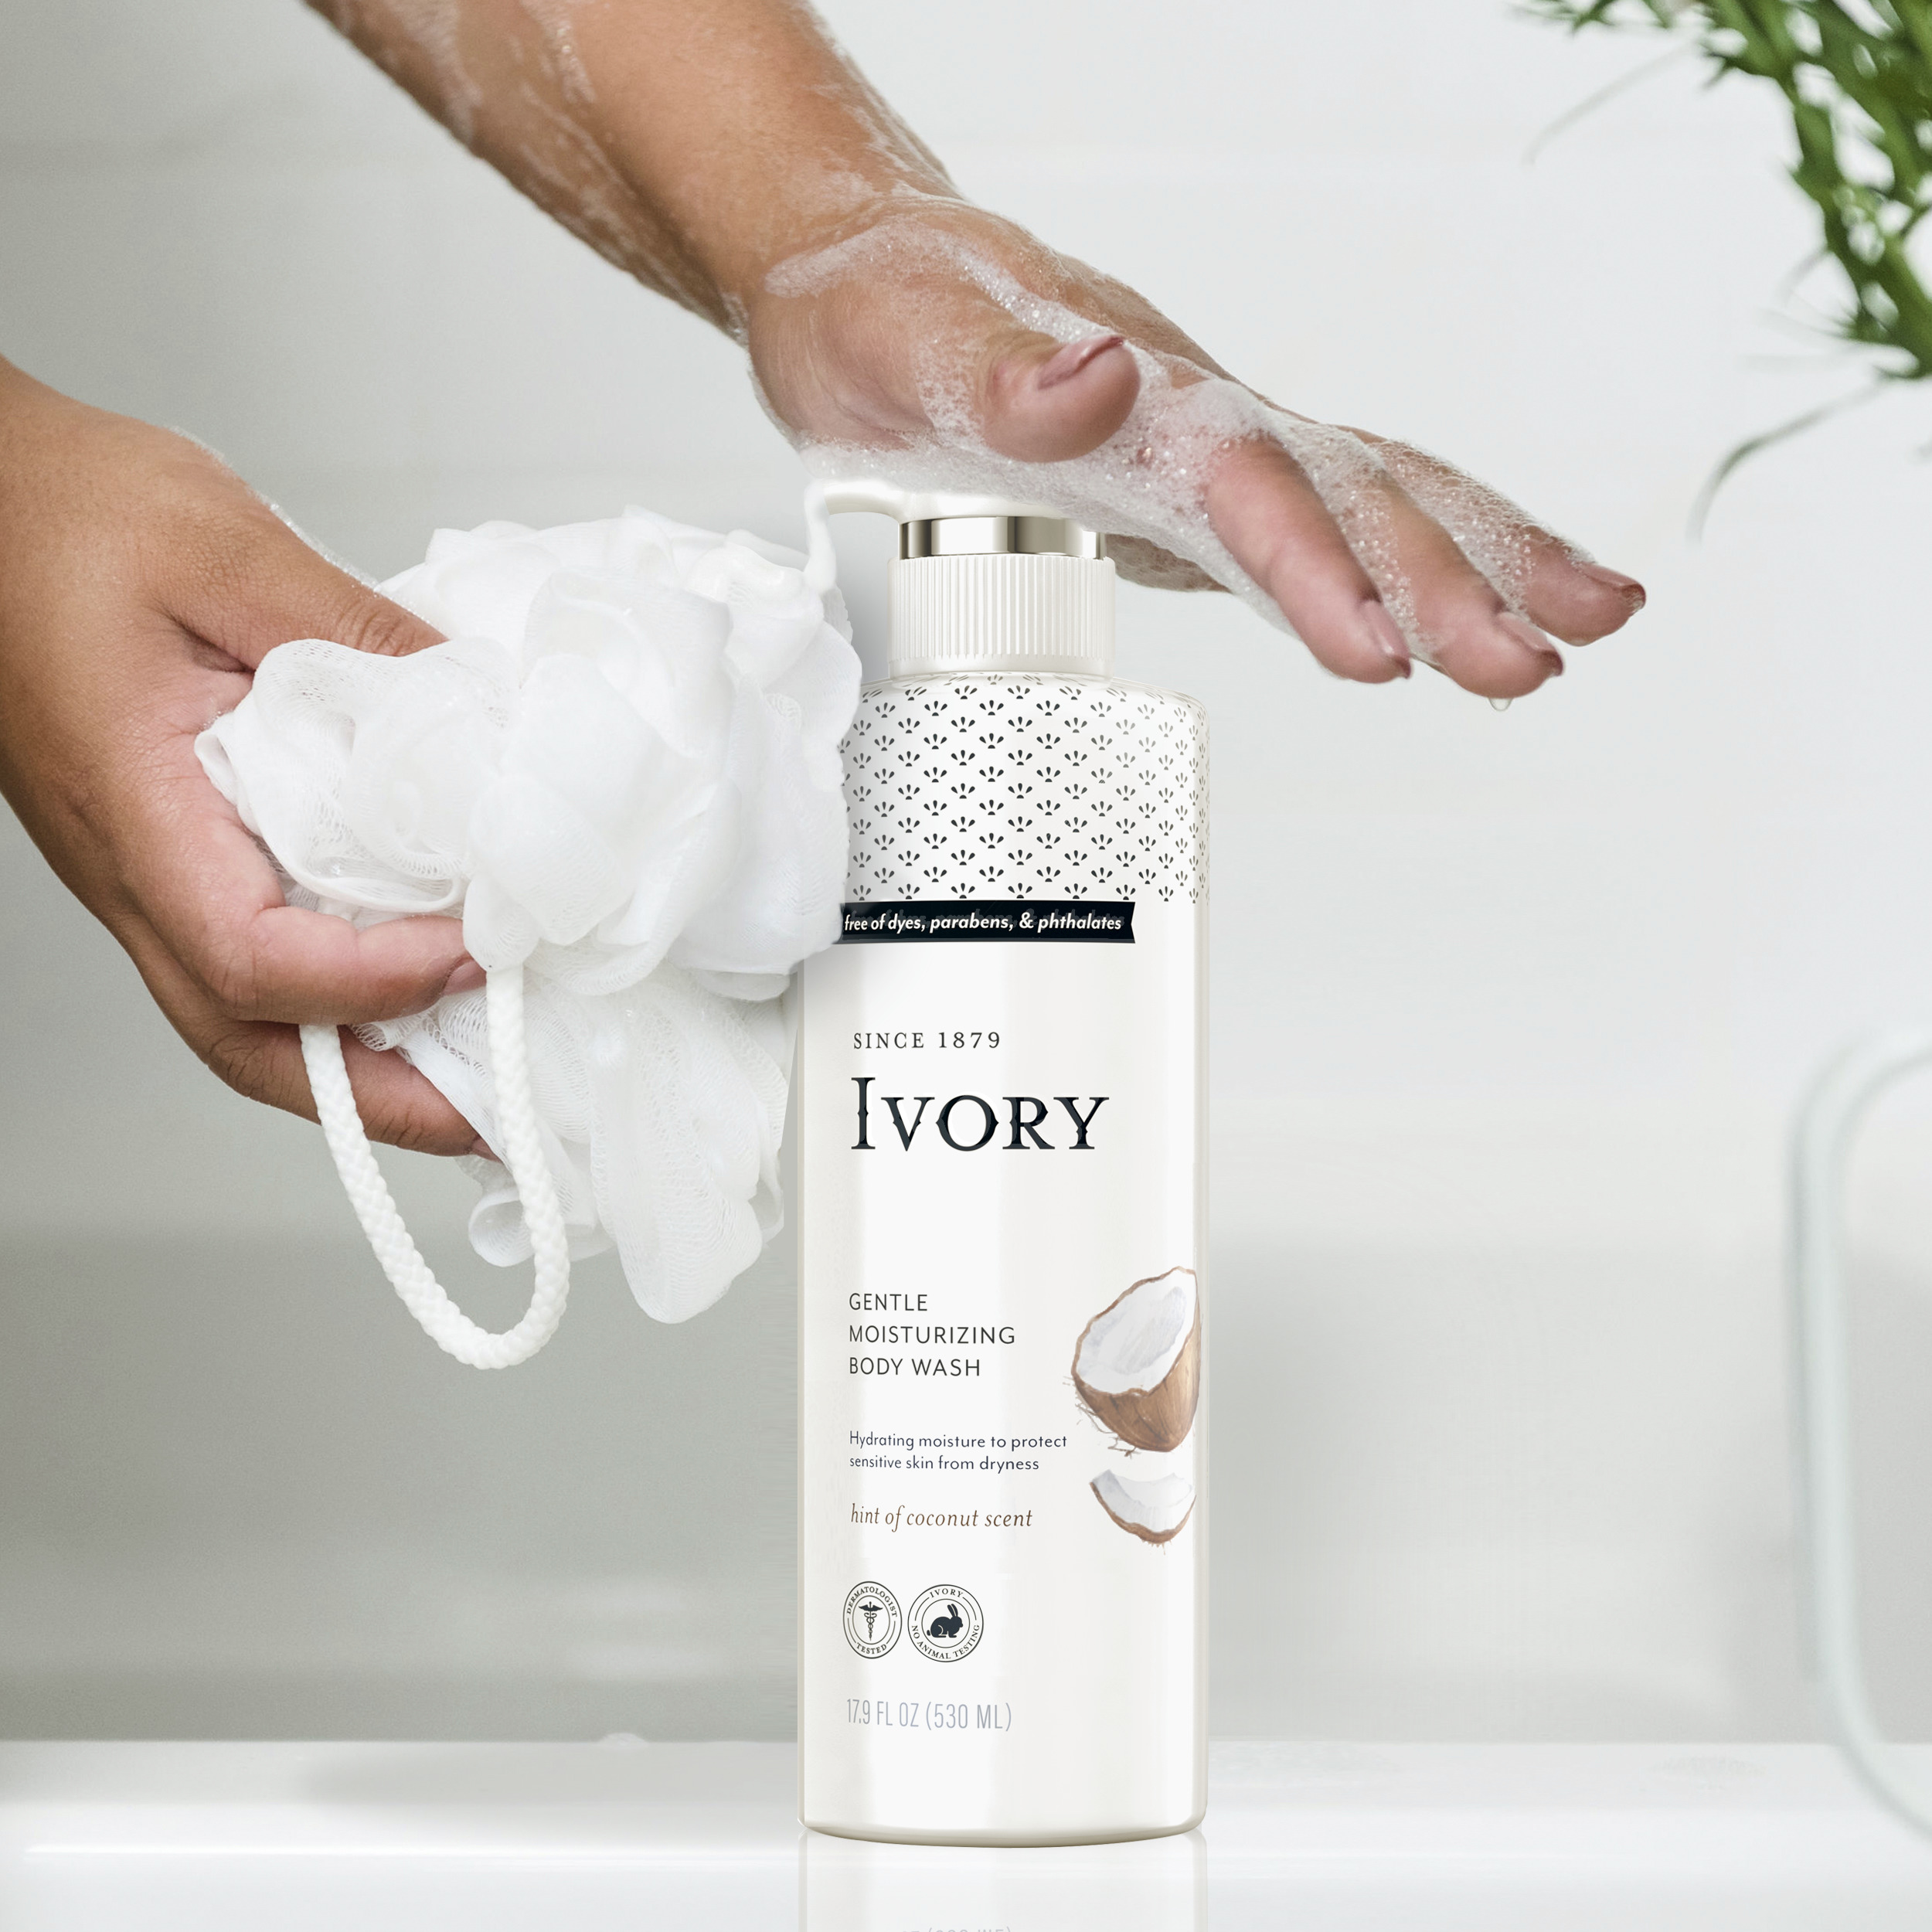 Ivory Body Wash with Hint of Coconut Scent, 17.9 Oz - image 5 of 6